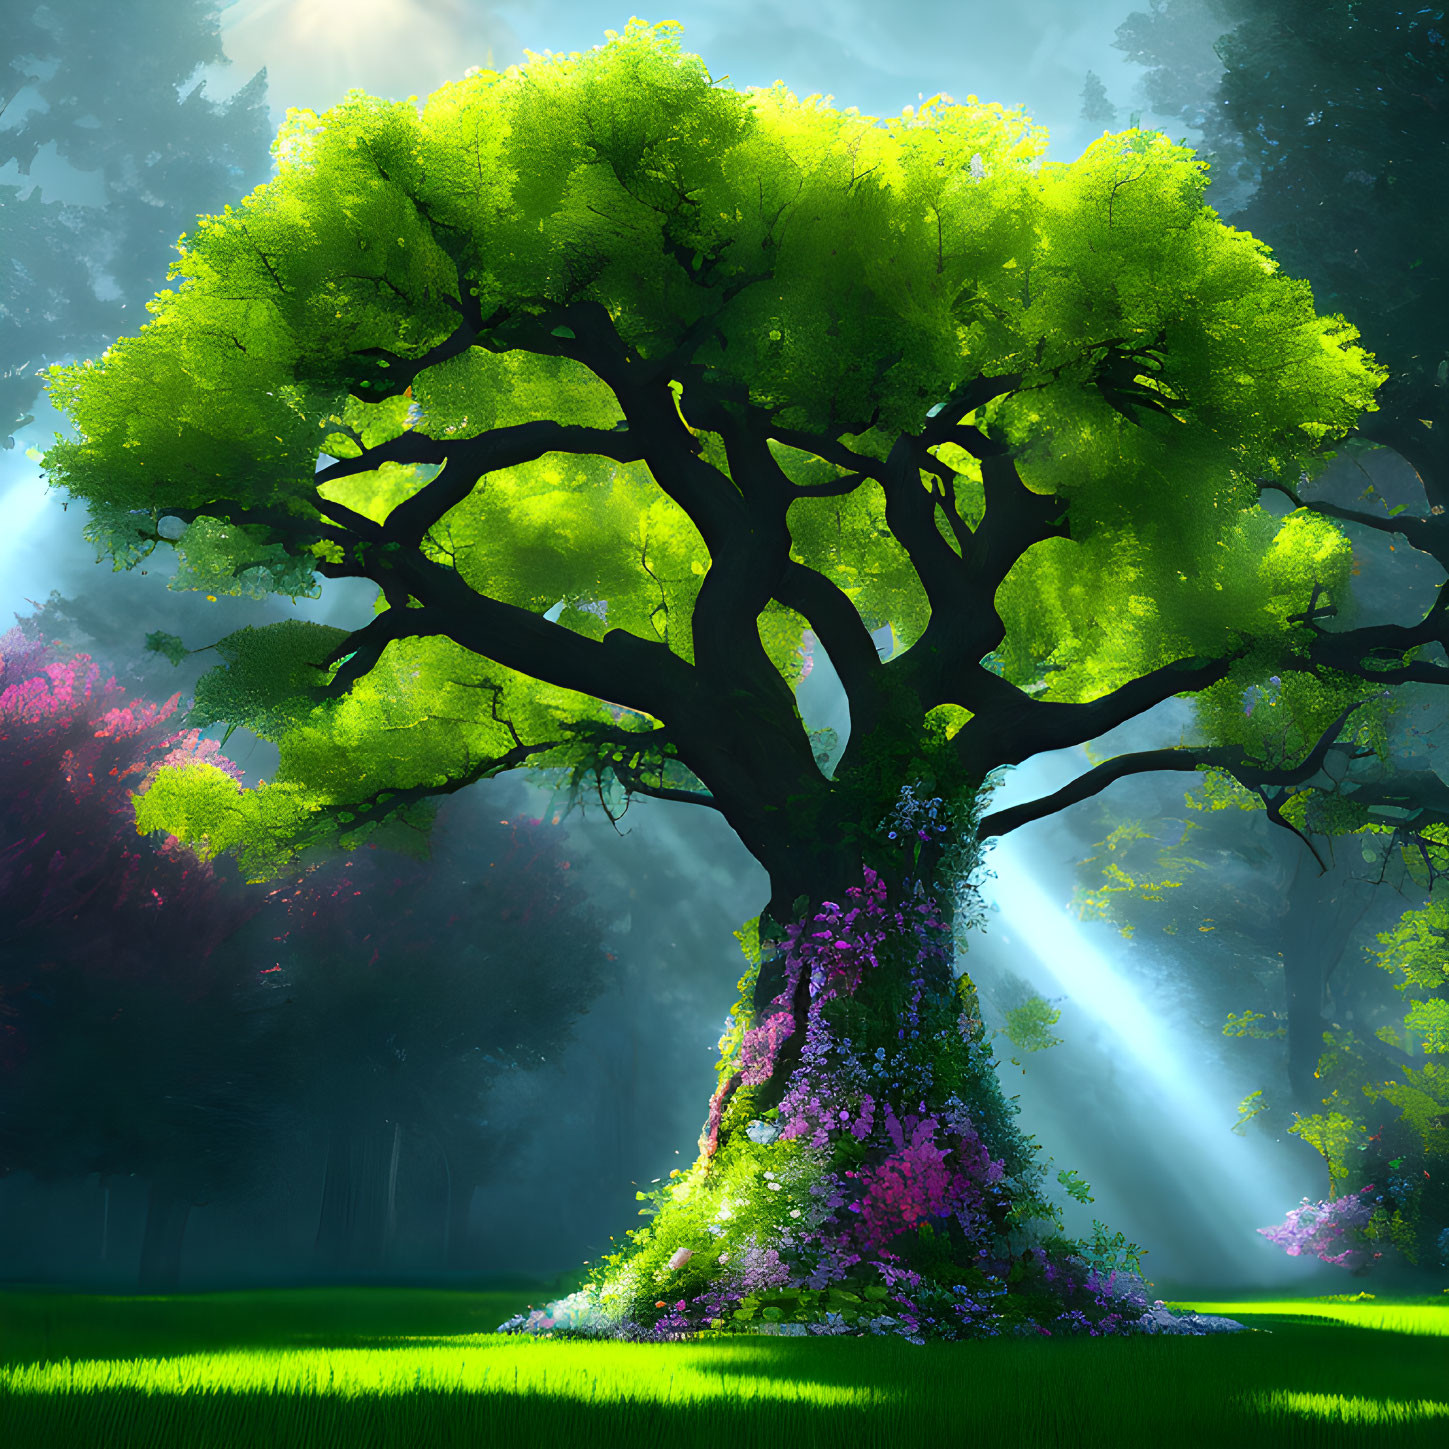 Majestic tree with lush green foliage and purple flowers in misty forest